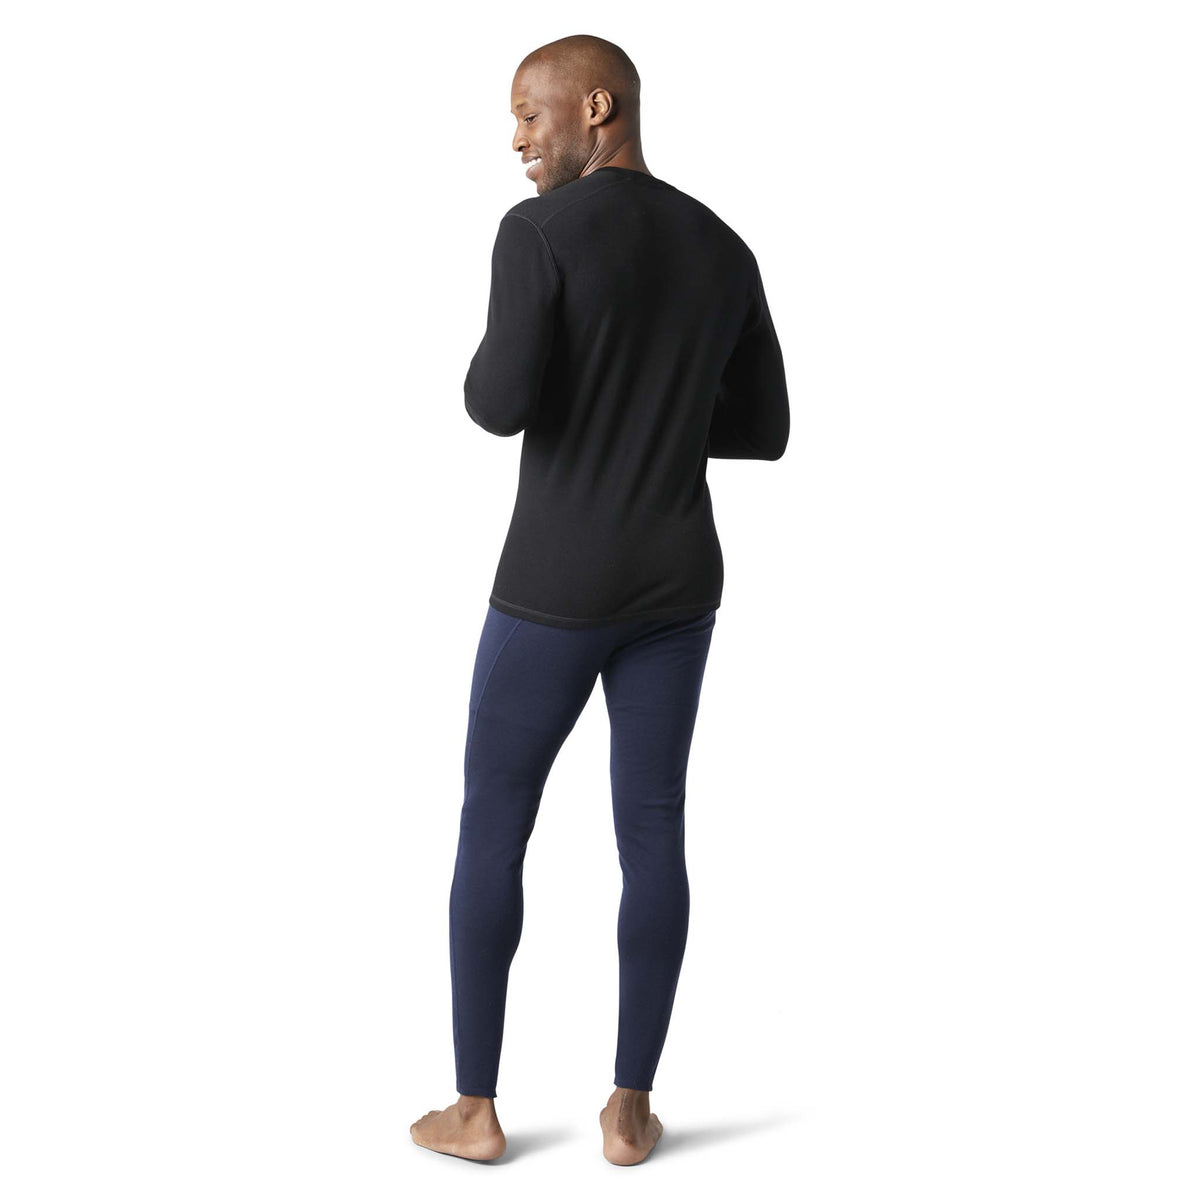 Smartwool Merino 250 Baselayer chandail col rond noir homme dos